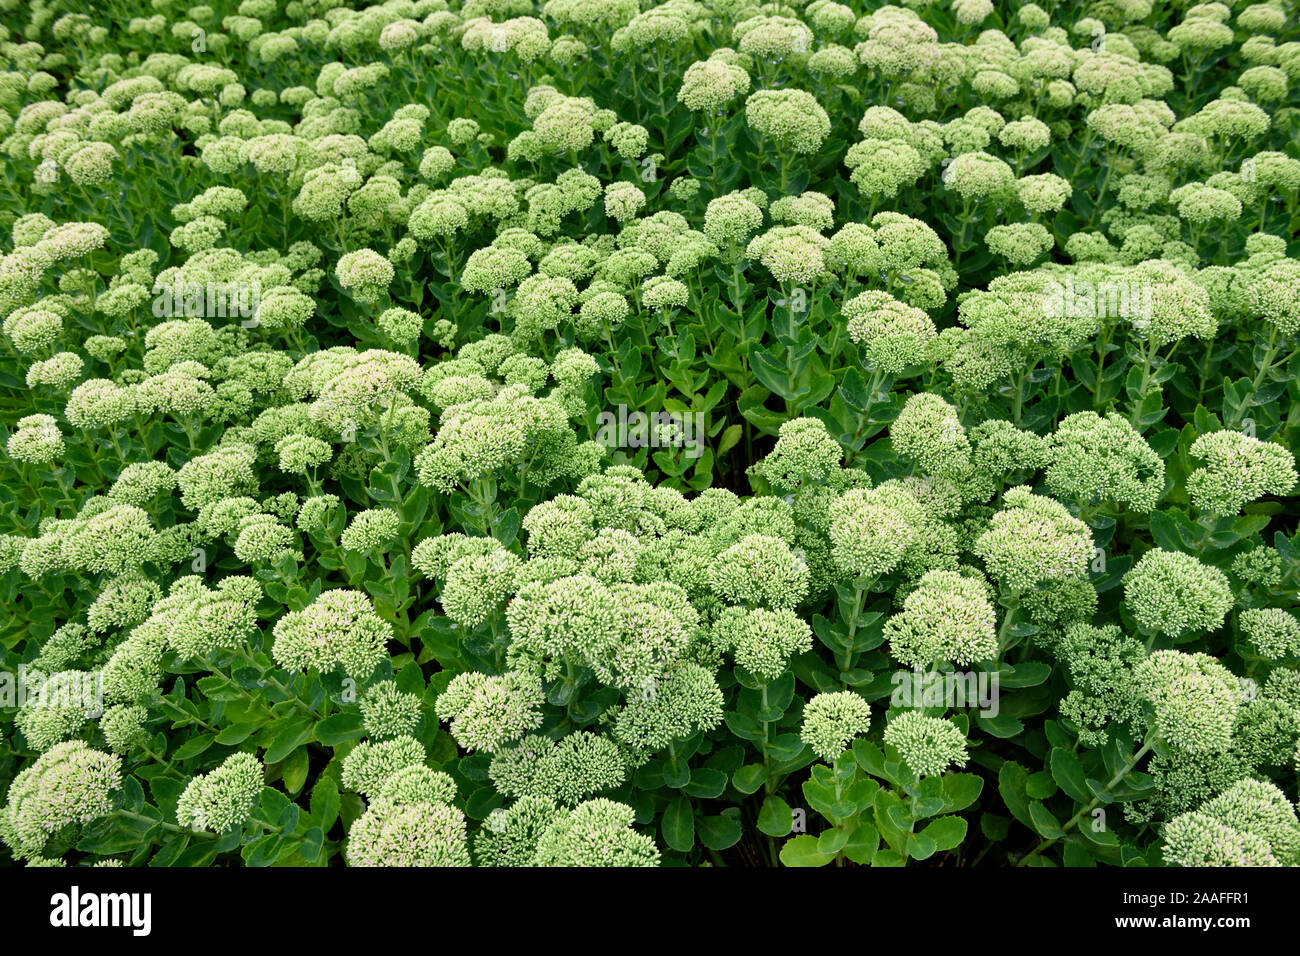 Abstract pattern of chartreuse flower heads and green leaves of Autumn Joy Sedum in a garden after rain Stock Photo